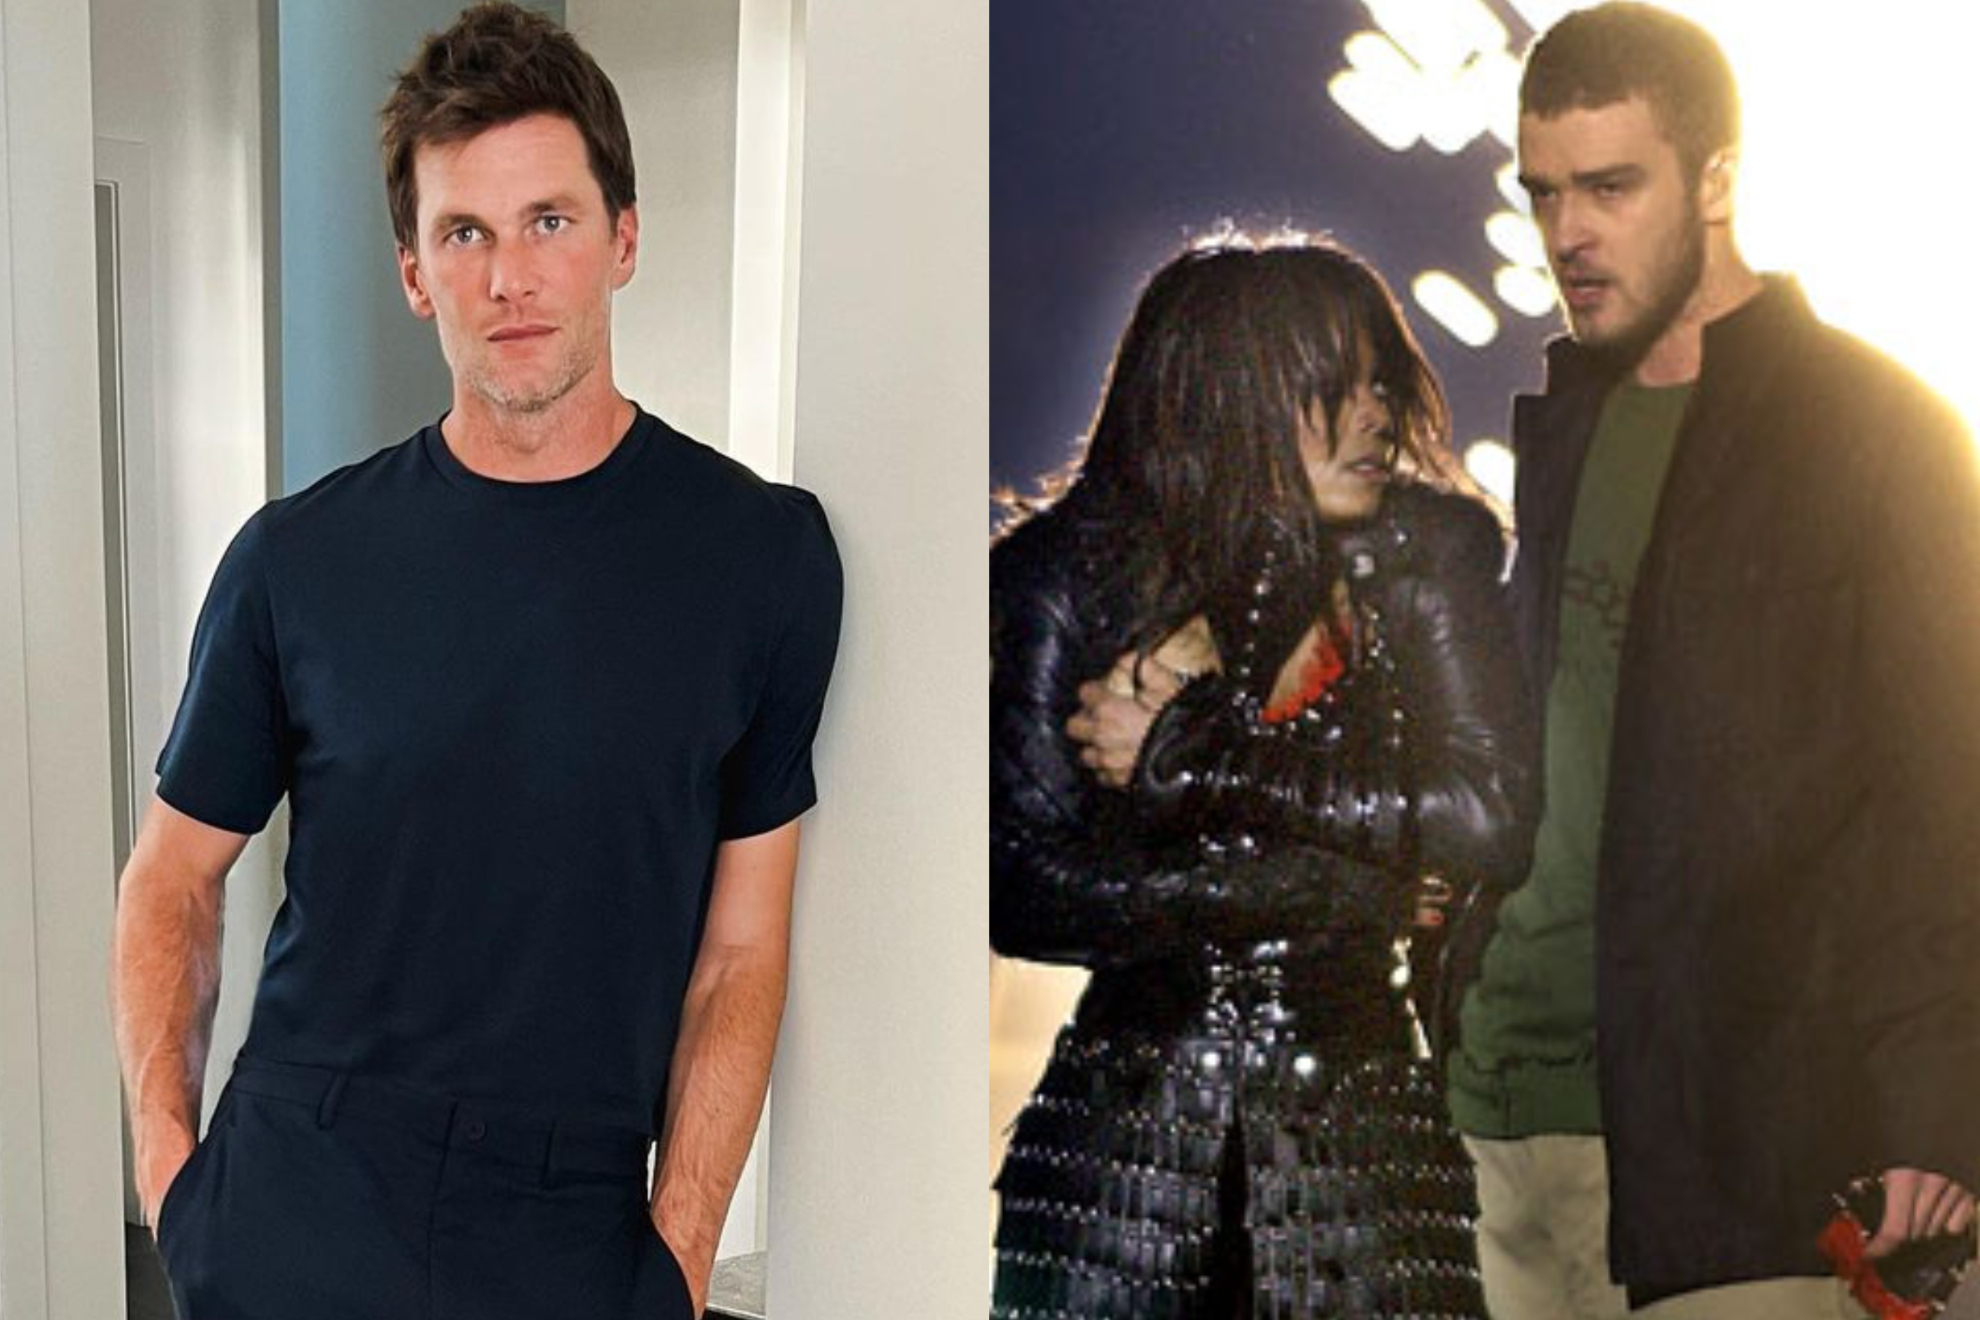 Tom Brady talks about Janet Jackson and Justim Timberlake incident at Super Bowl in 2004.